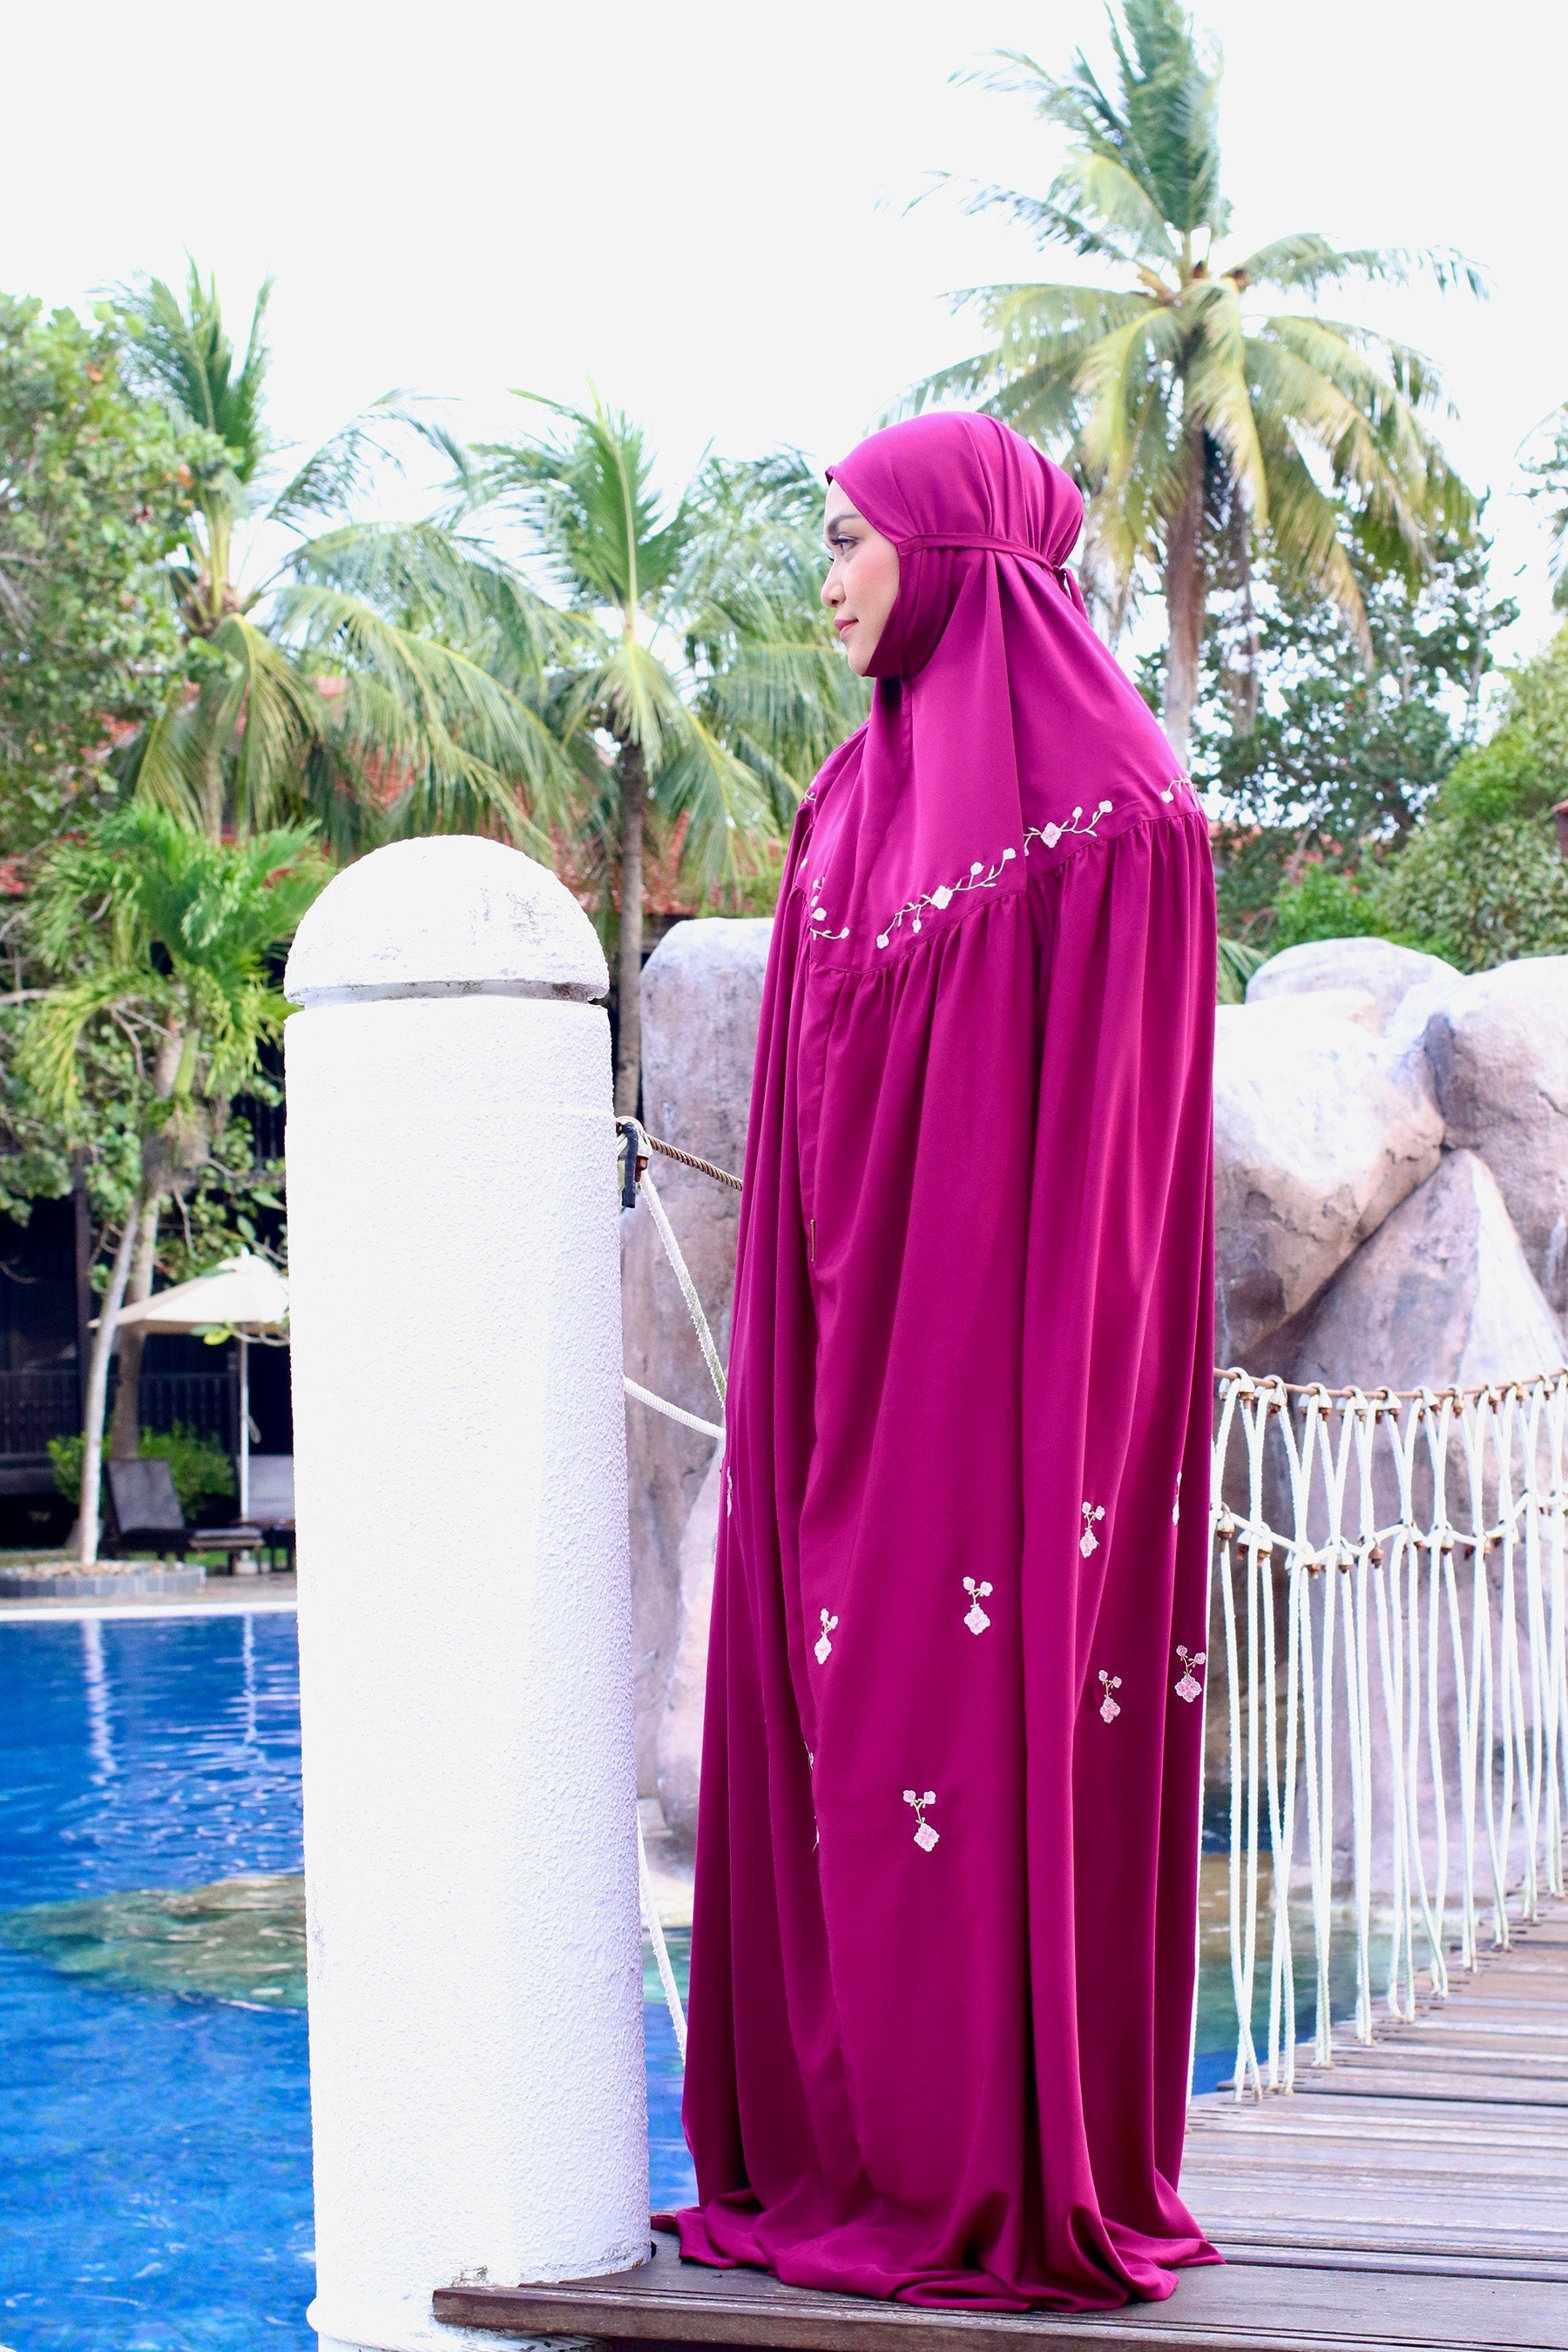 The One Piece Telekung in Burgundy